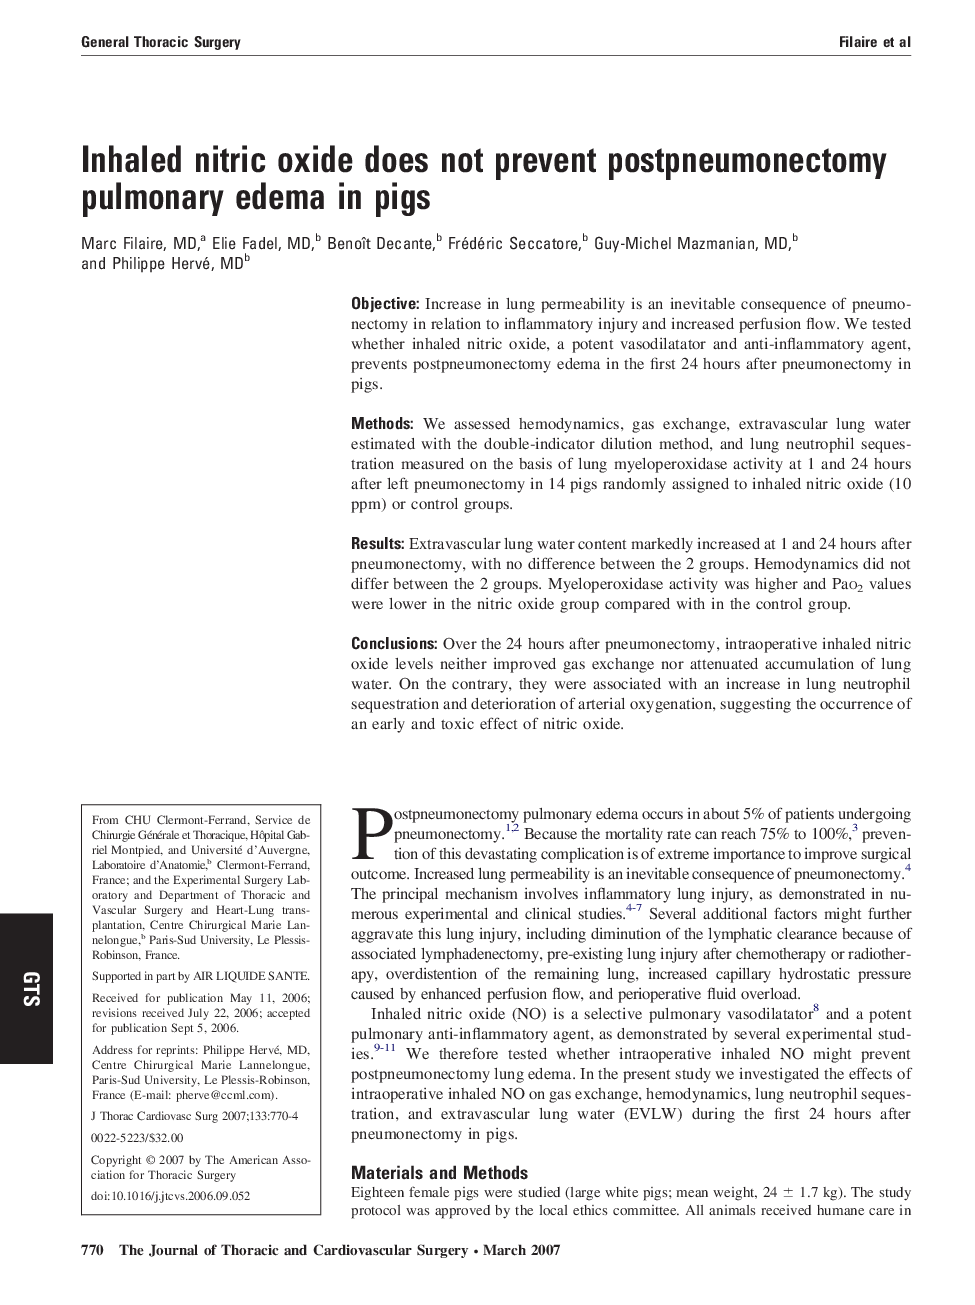 Inhaled nitric oxide does not prevent postpneumonectomy pulmonary edema in pigs 